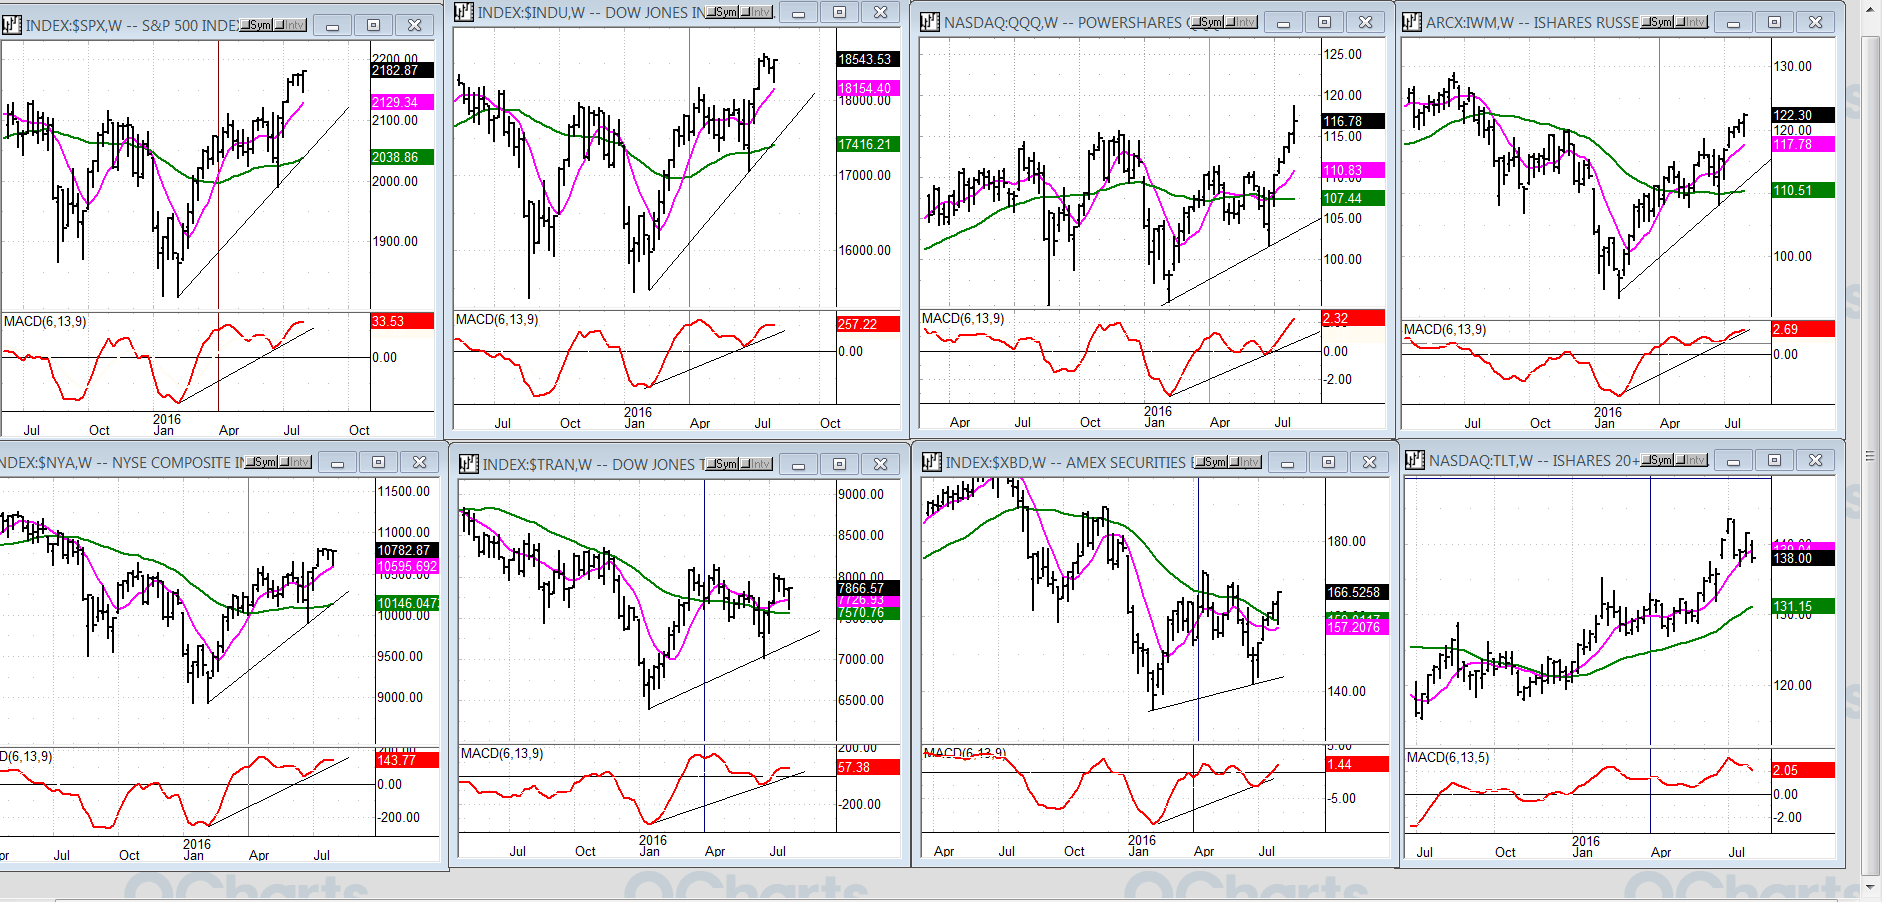 Some Leading & Confirming Indexes Weekly